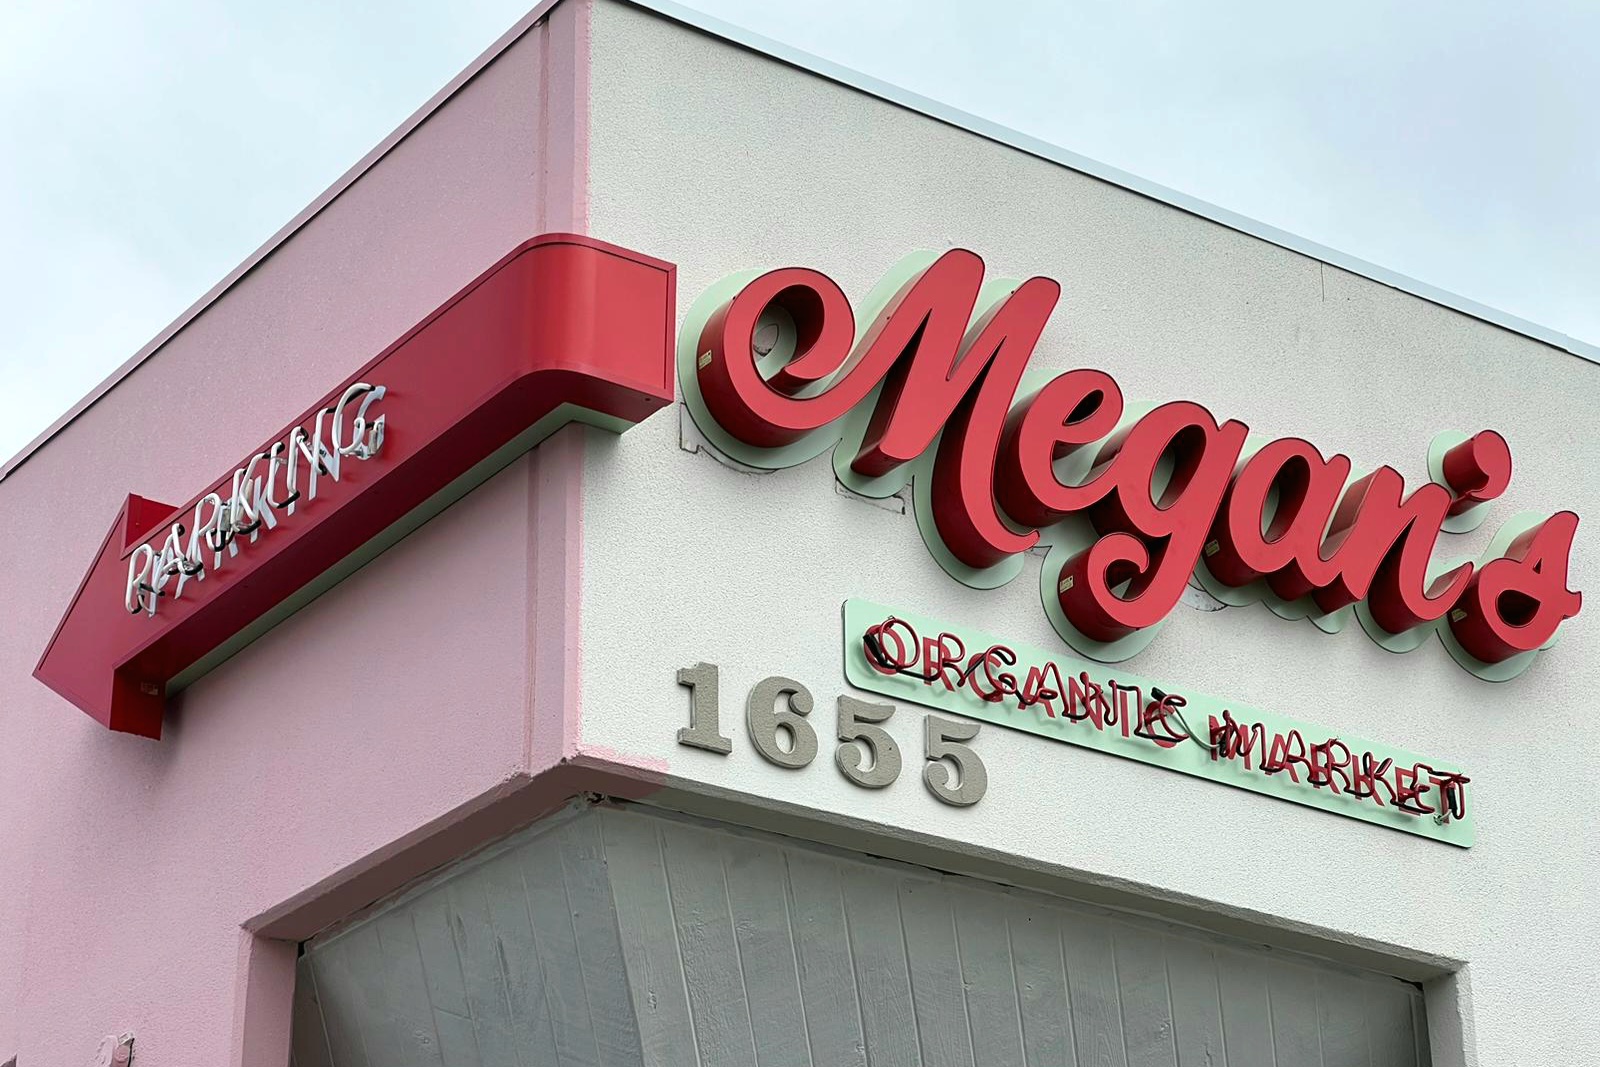 You are currently viewing Megan’s Organic Channel Letters & Neon Signs Corona 